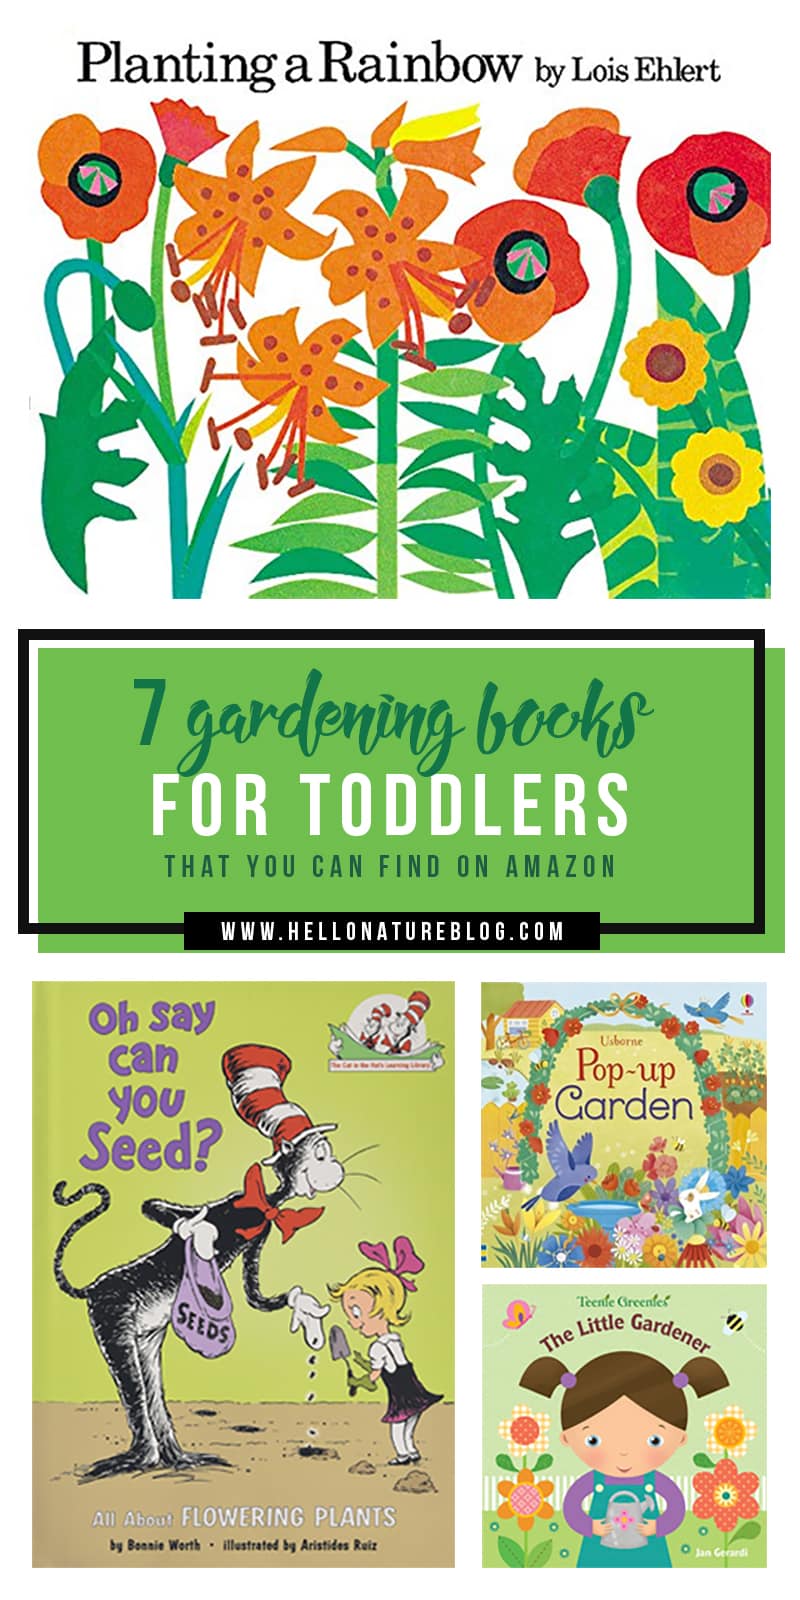 Gardening Books for Toddlers